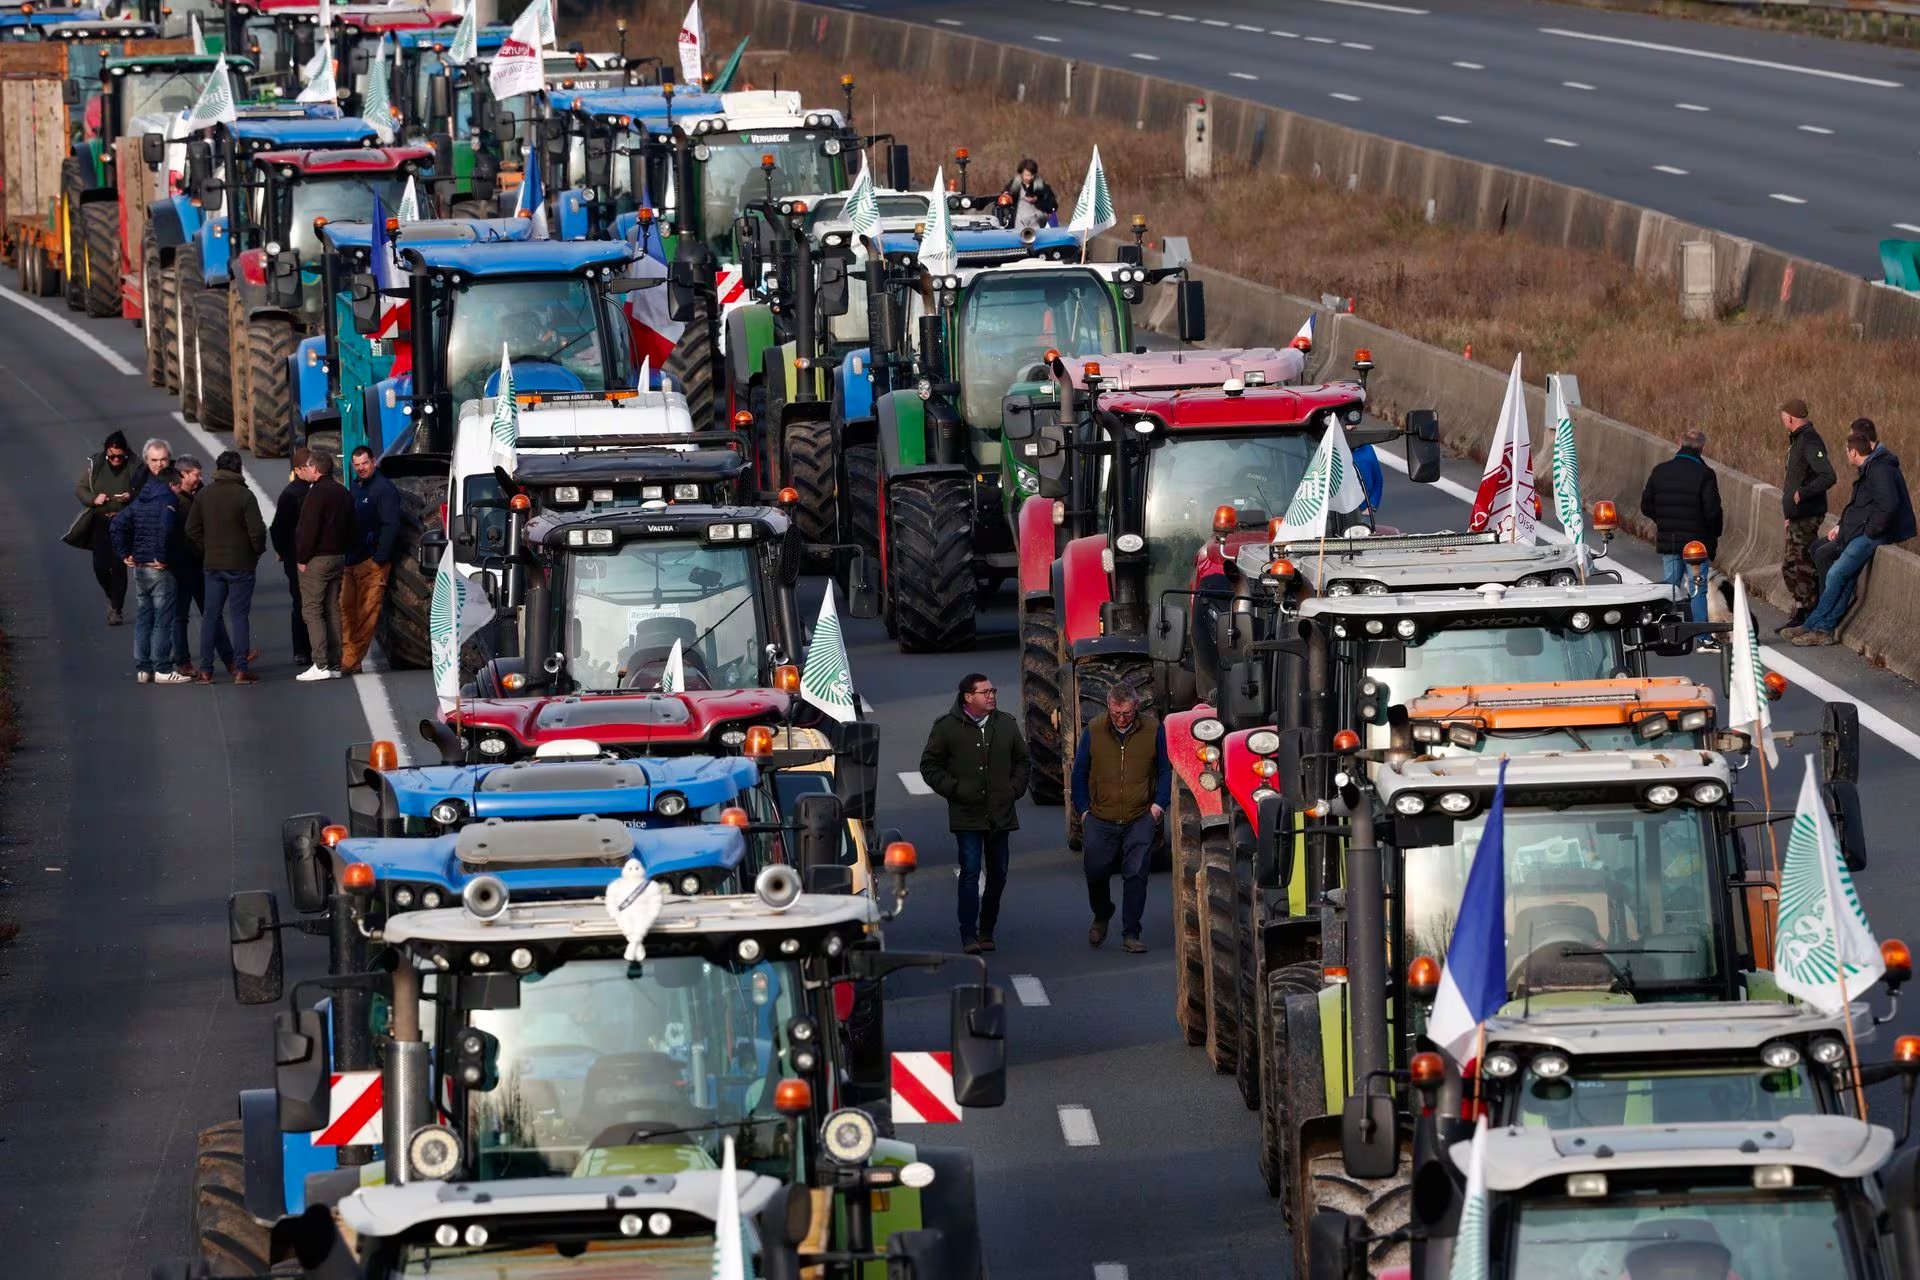 In pictures: Angry French farmers block highways